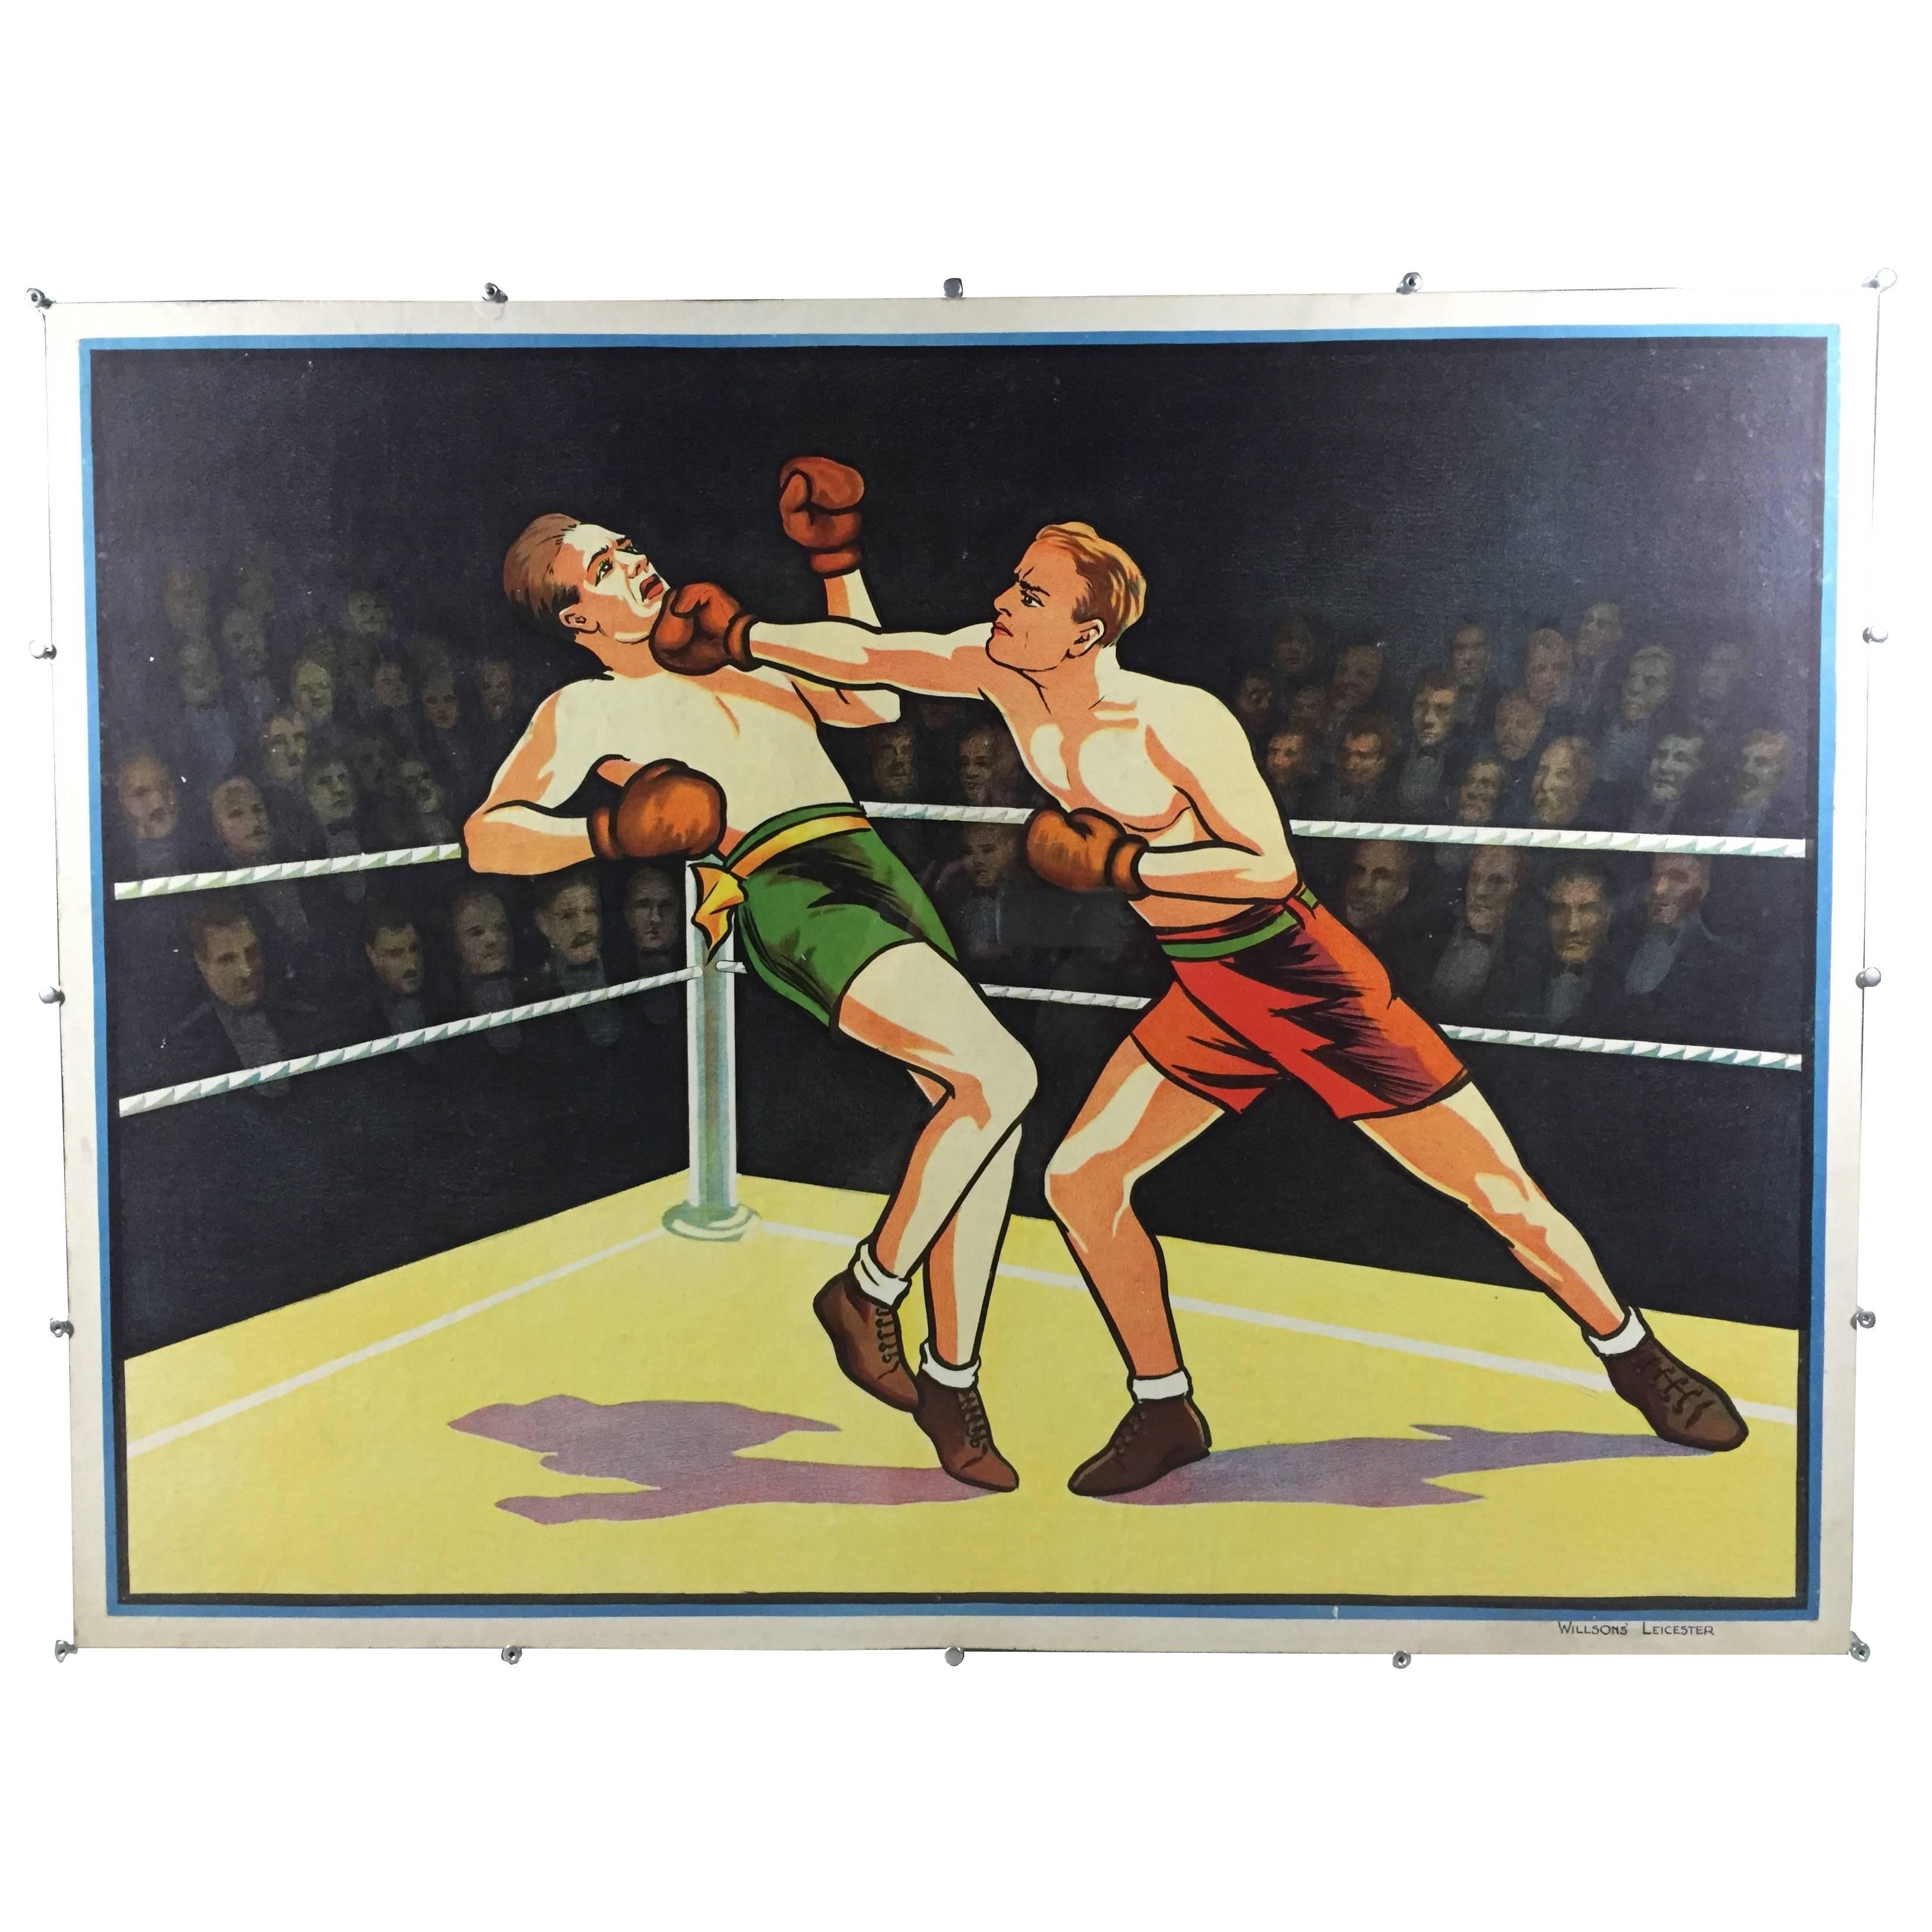 Vintage Boxing Lithograph, Willsons' Leicester, England, 1930s